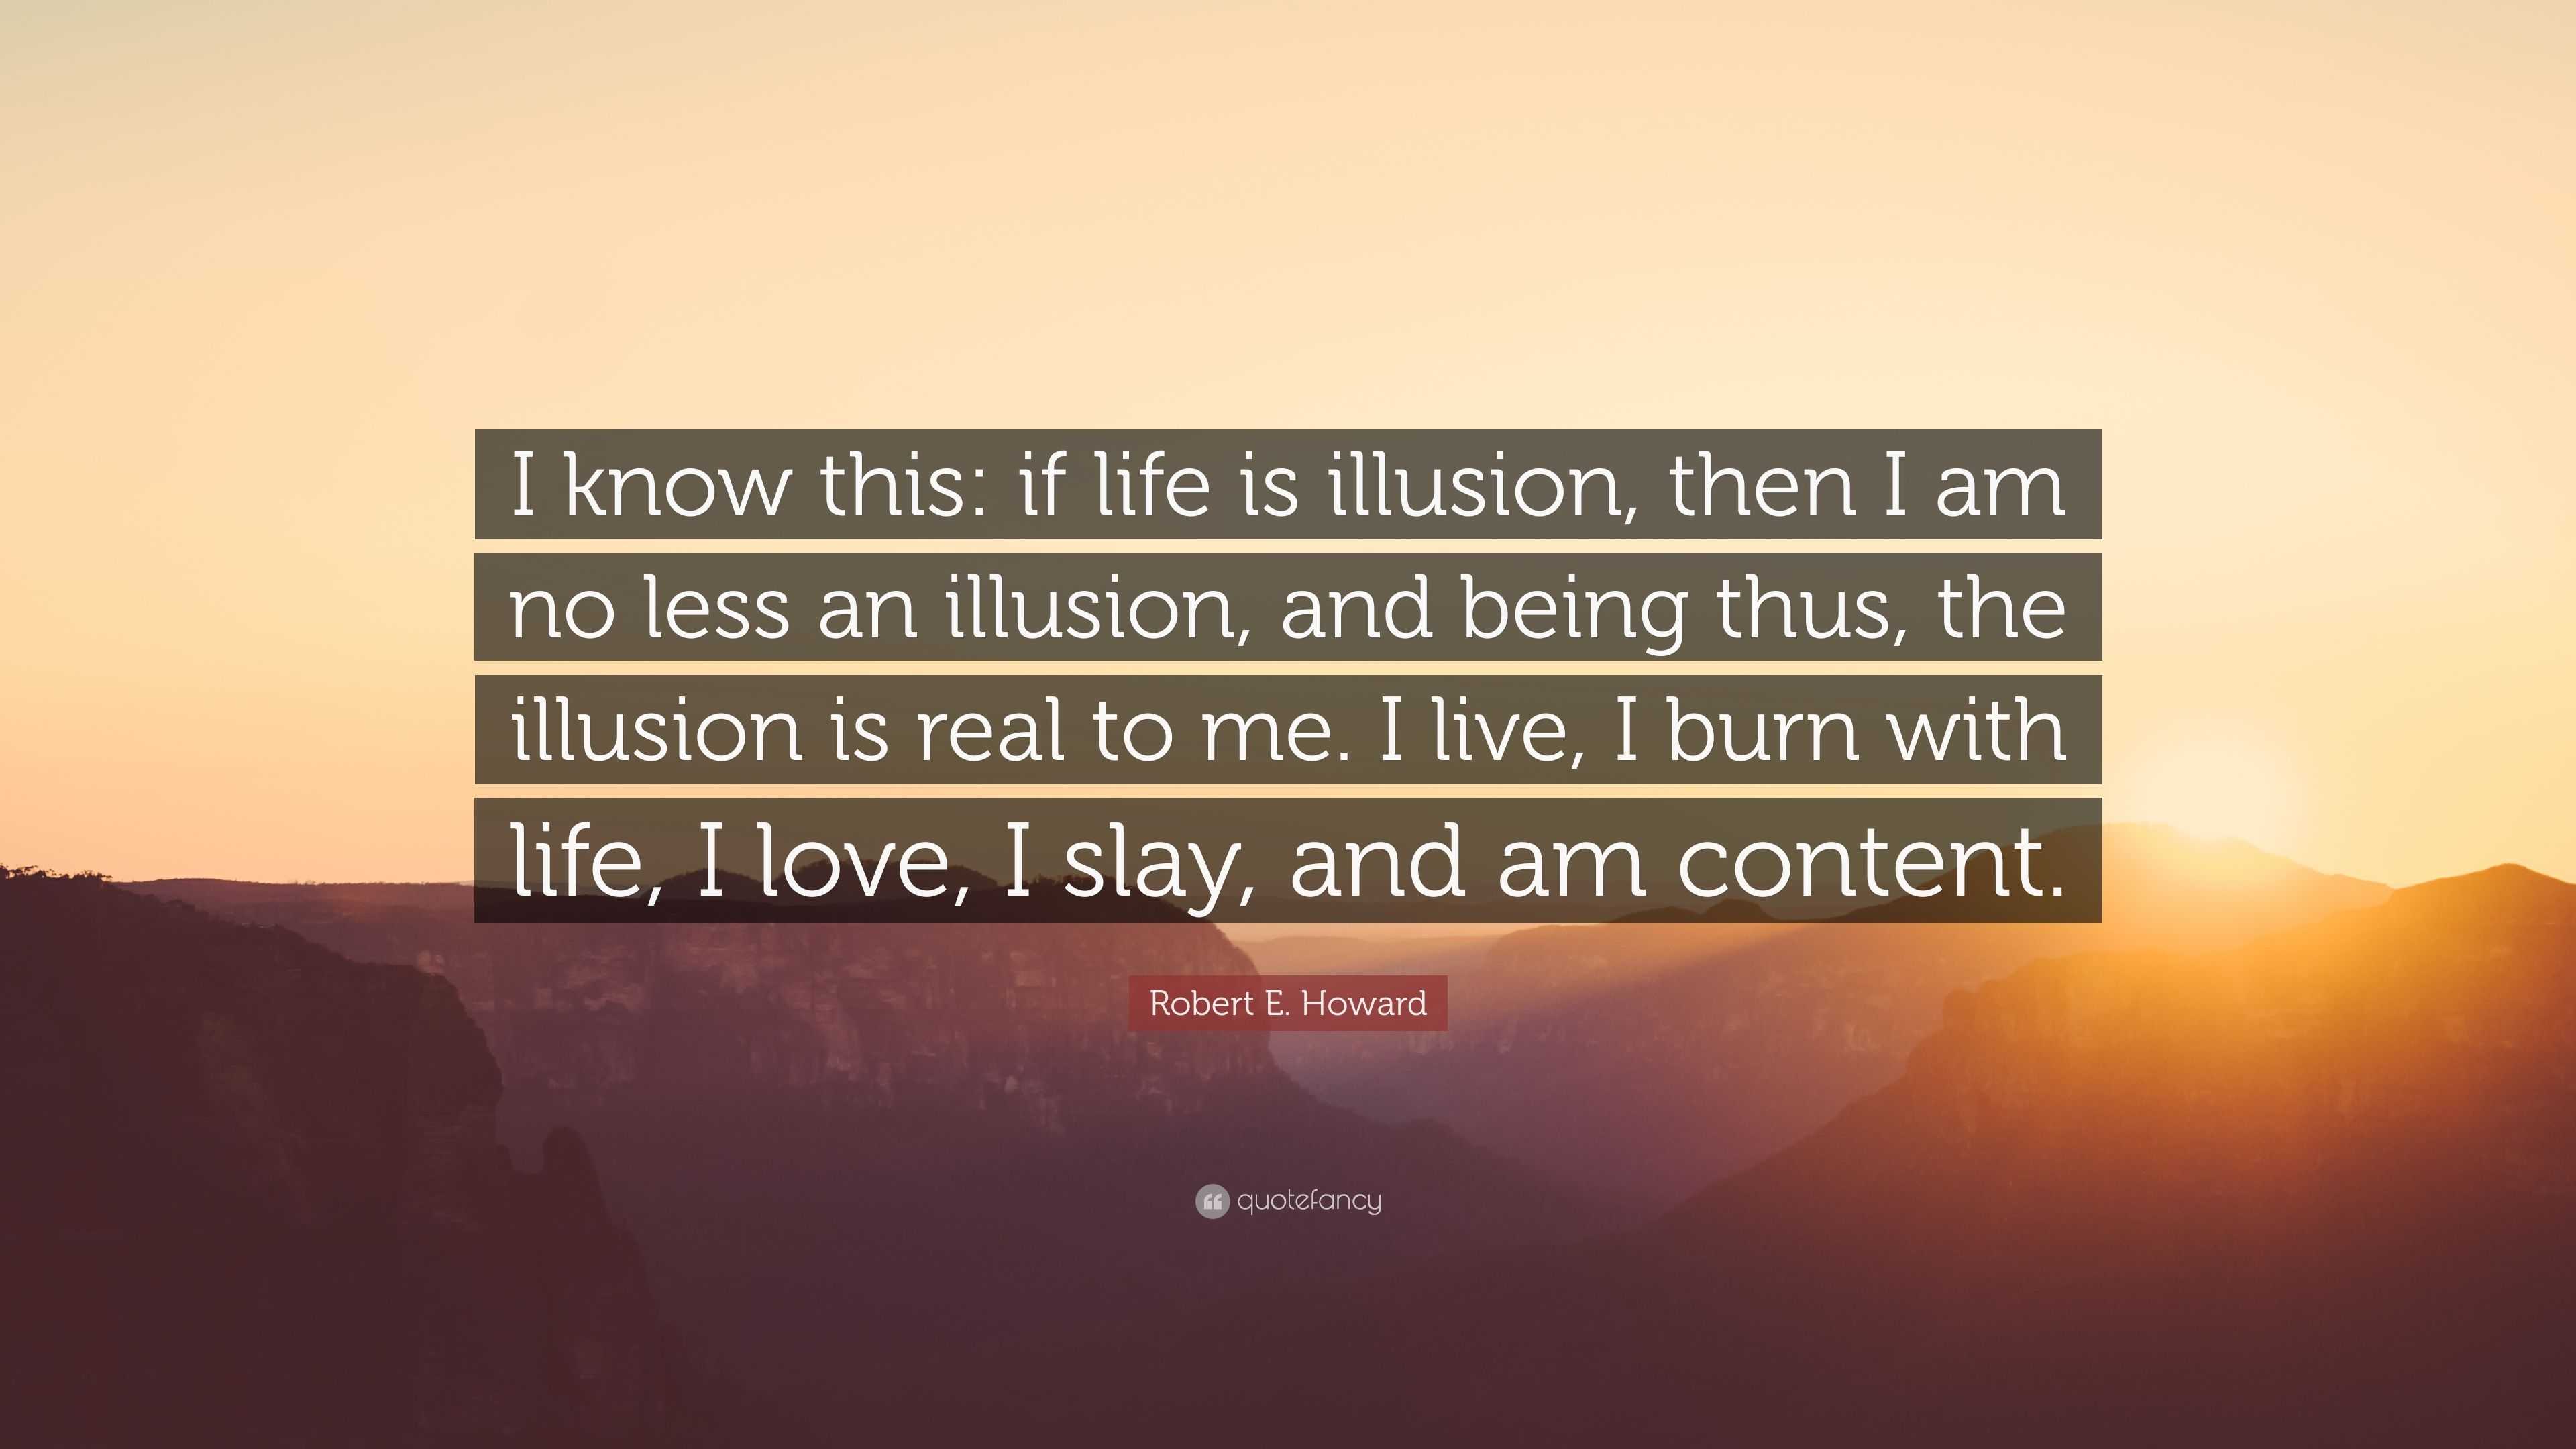 Robert E Howard Quote “I know this if life is illusion